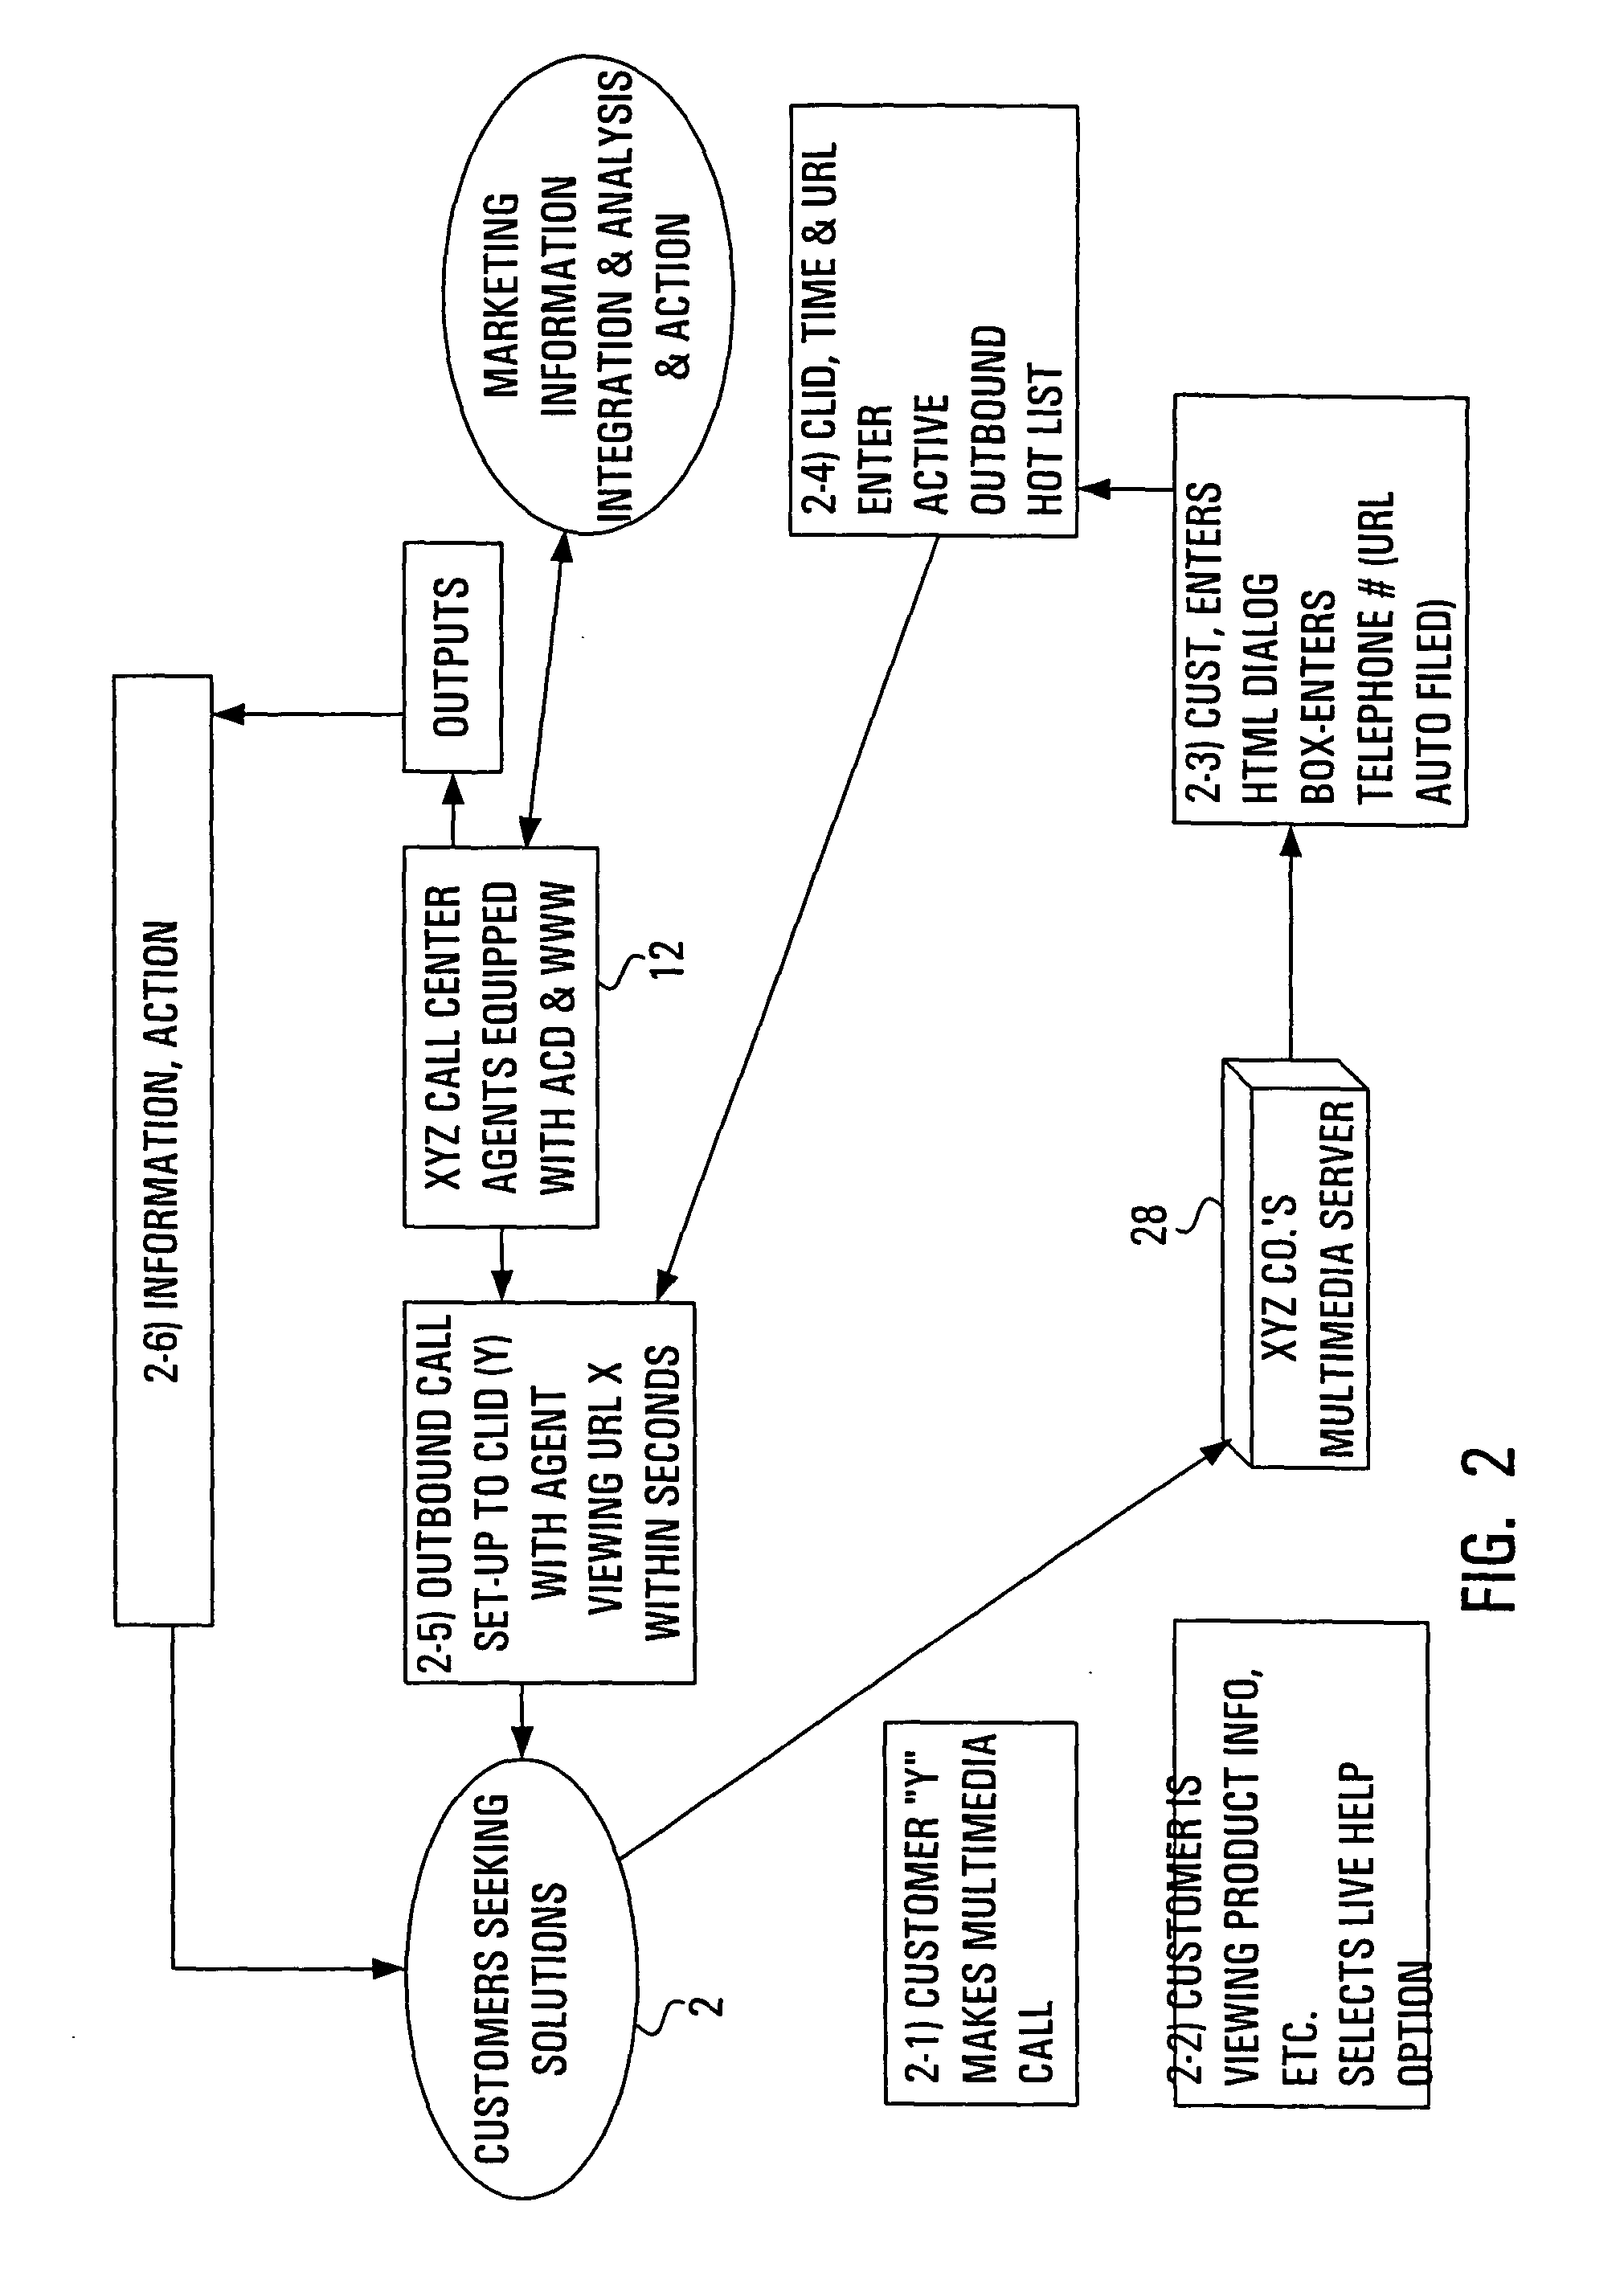 Method and system for coordinating data and voice communications via customer contact channel changing system